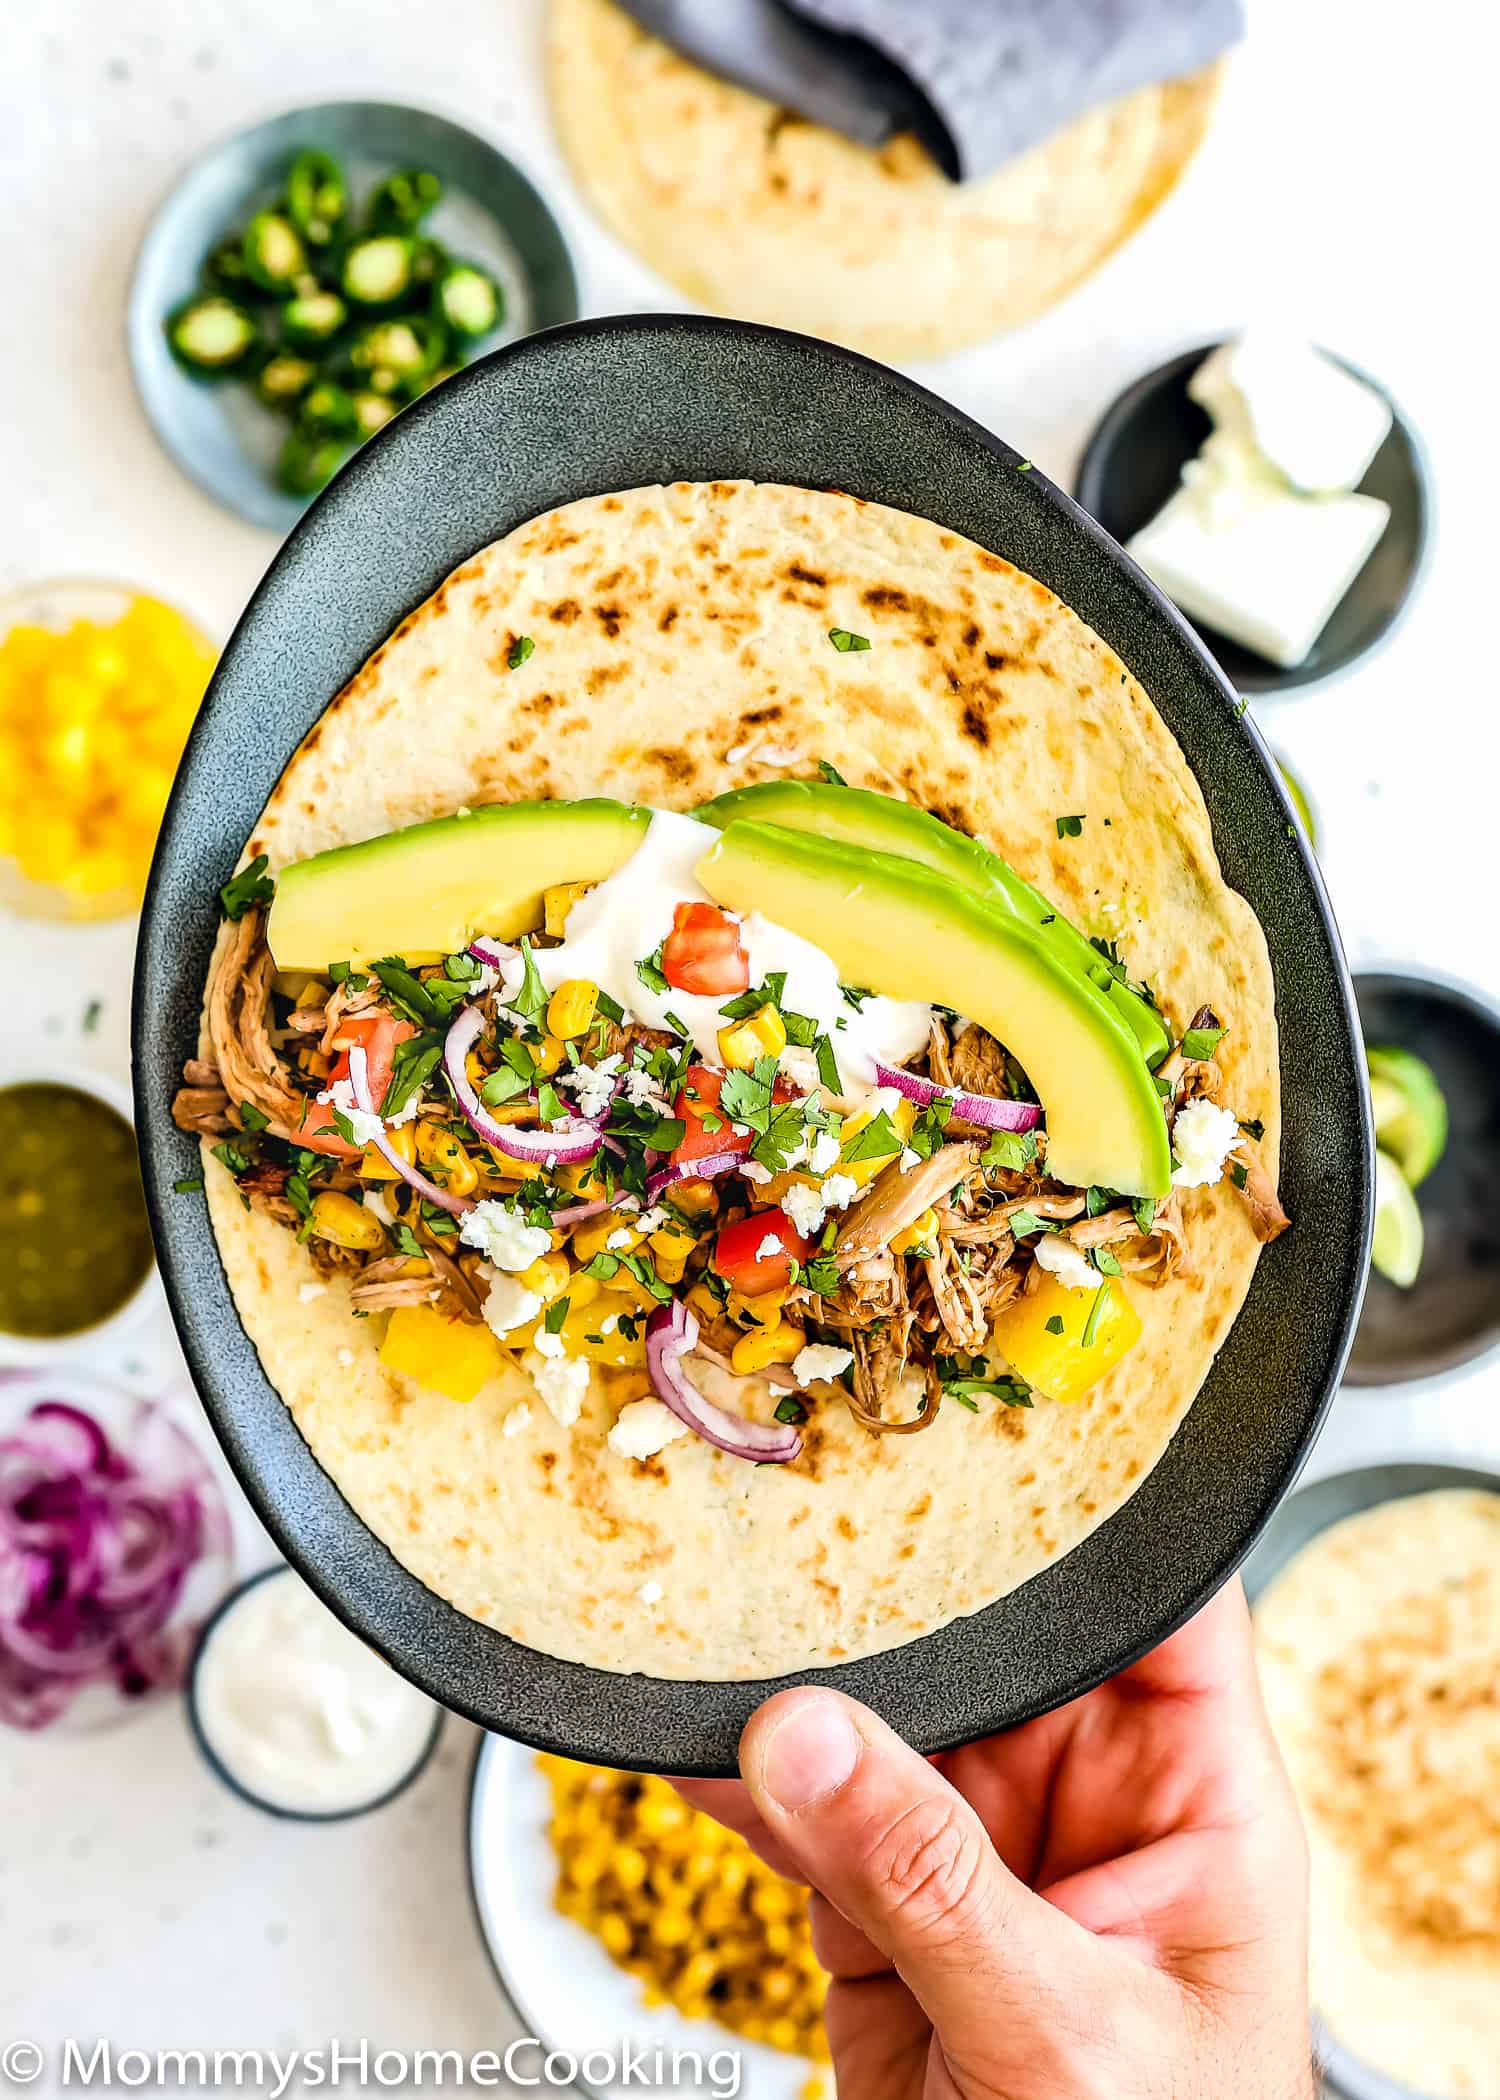 a hand holding a plate with a Chipotle Carnitas taco with toppings and avocado.